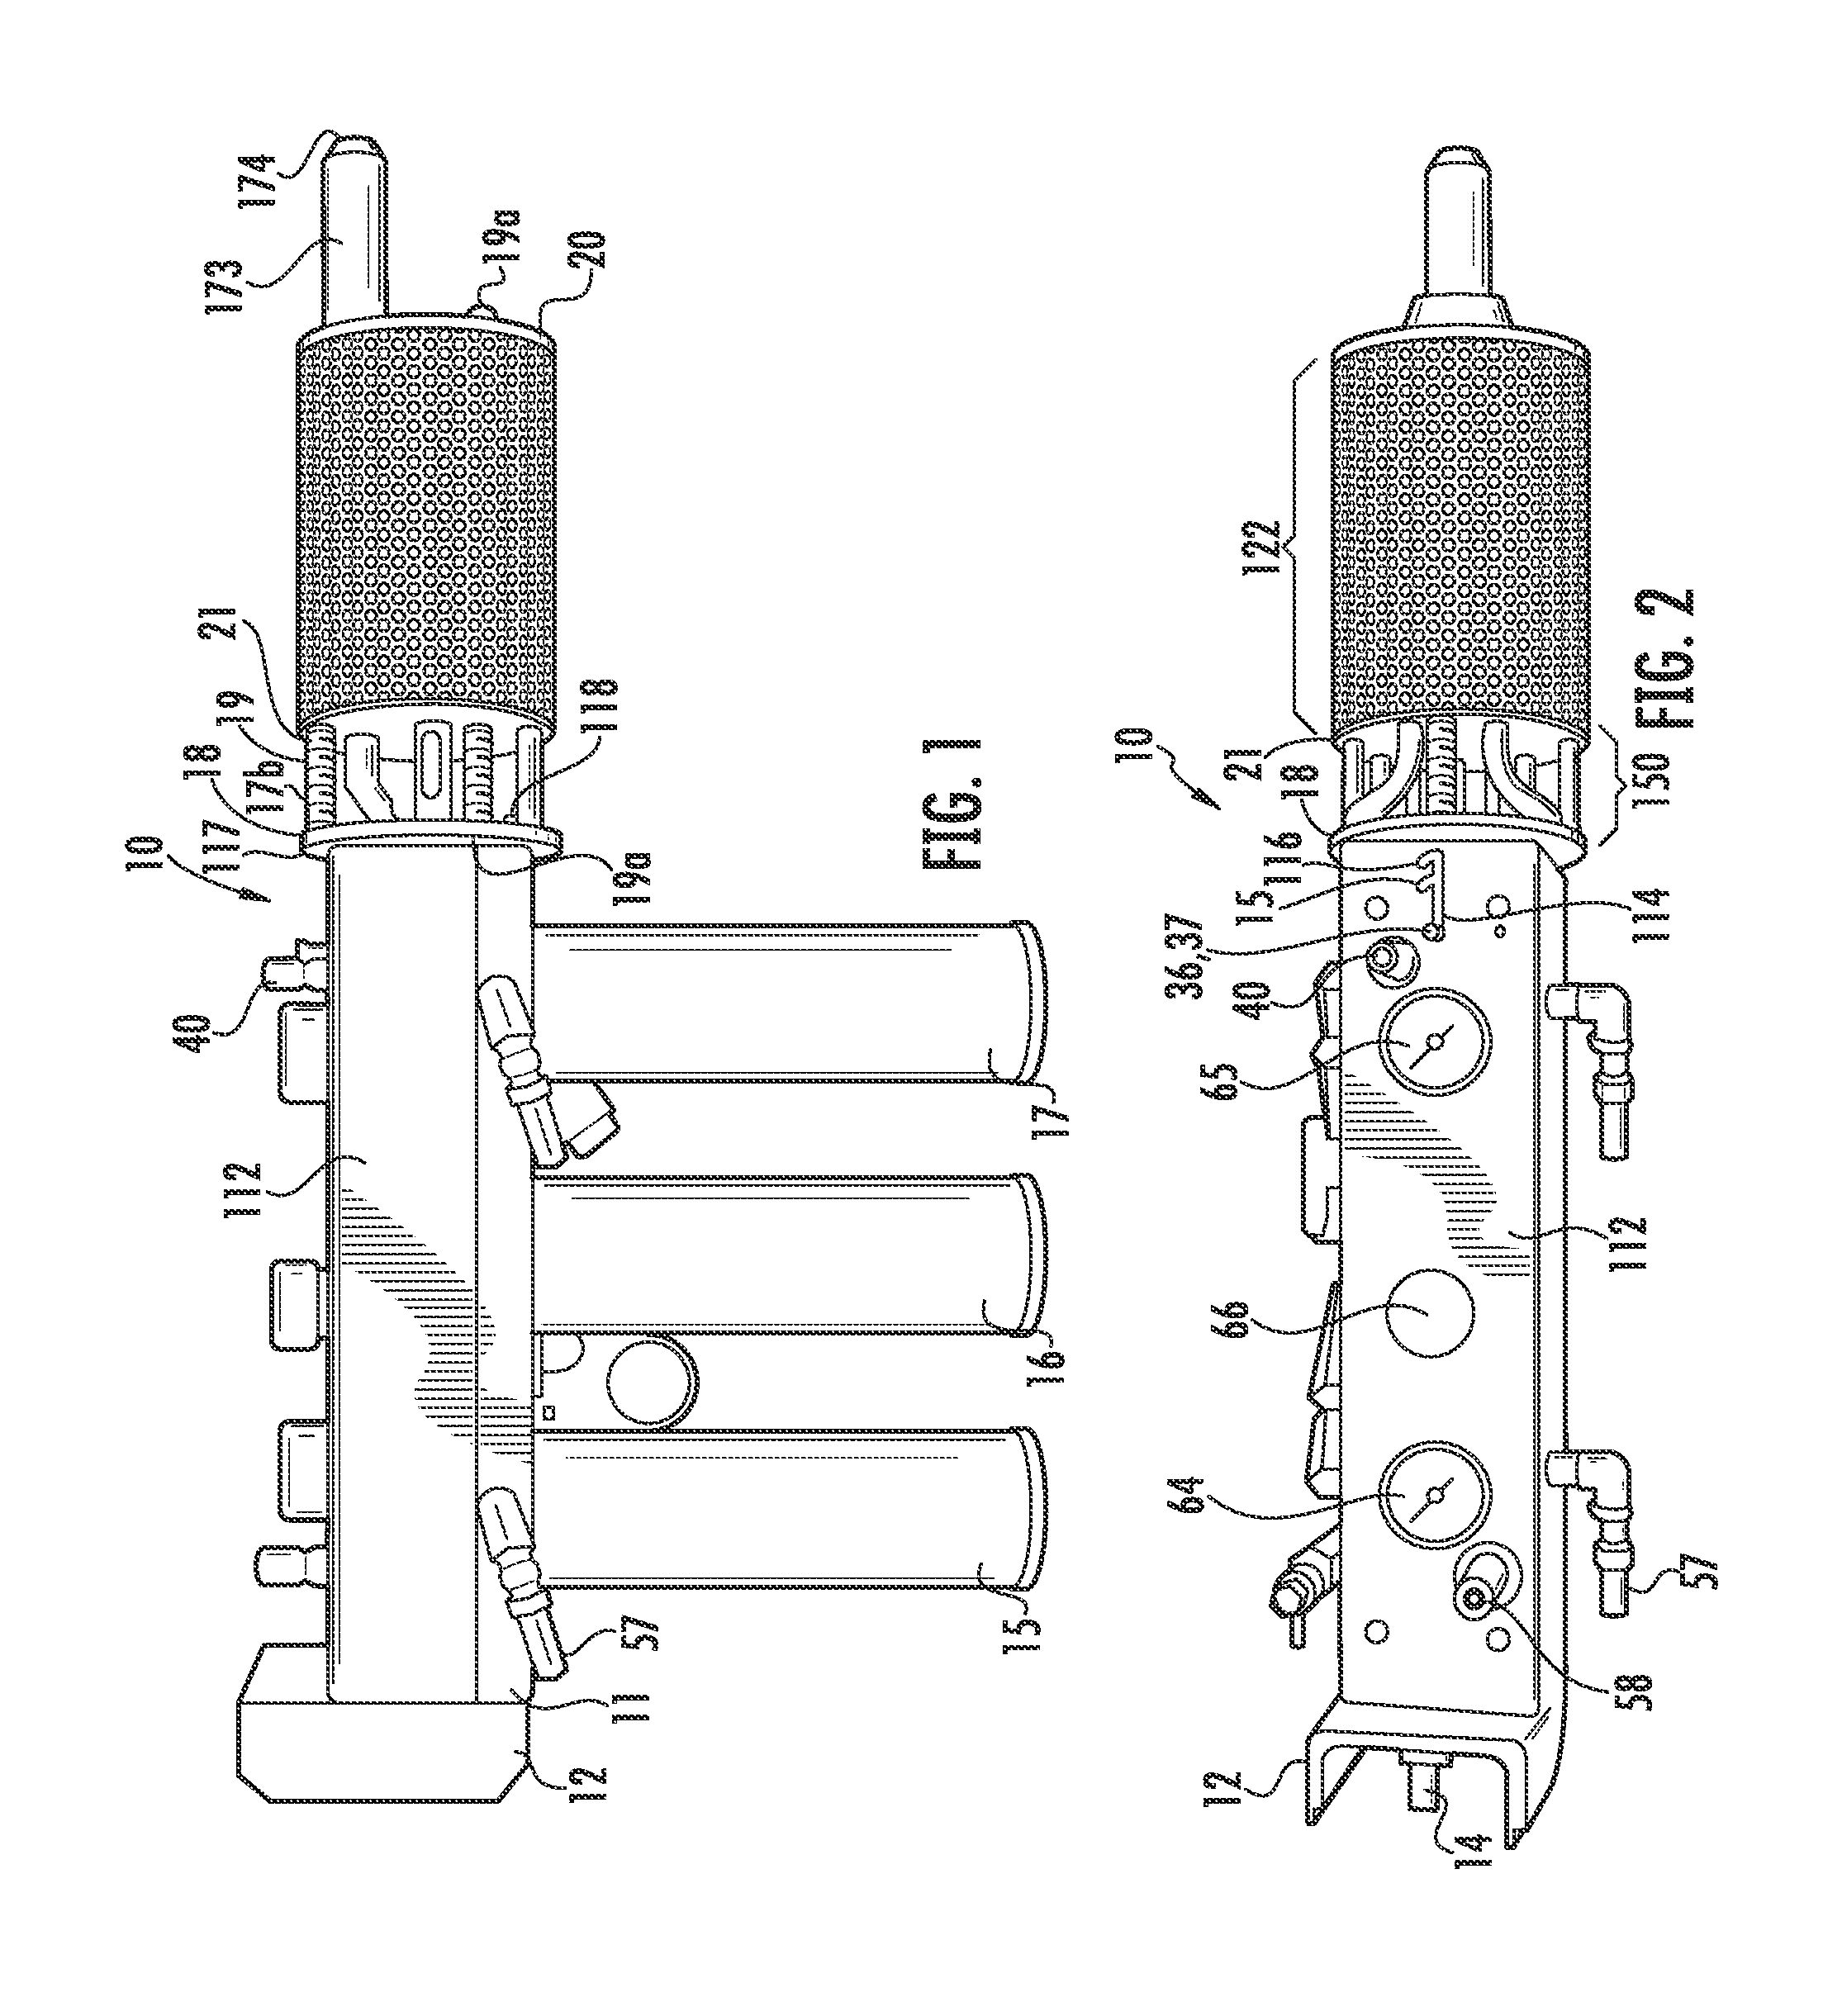 Device for generating large volumes of smoke